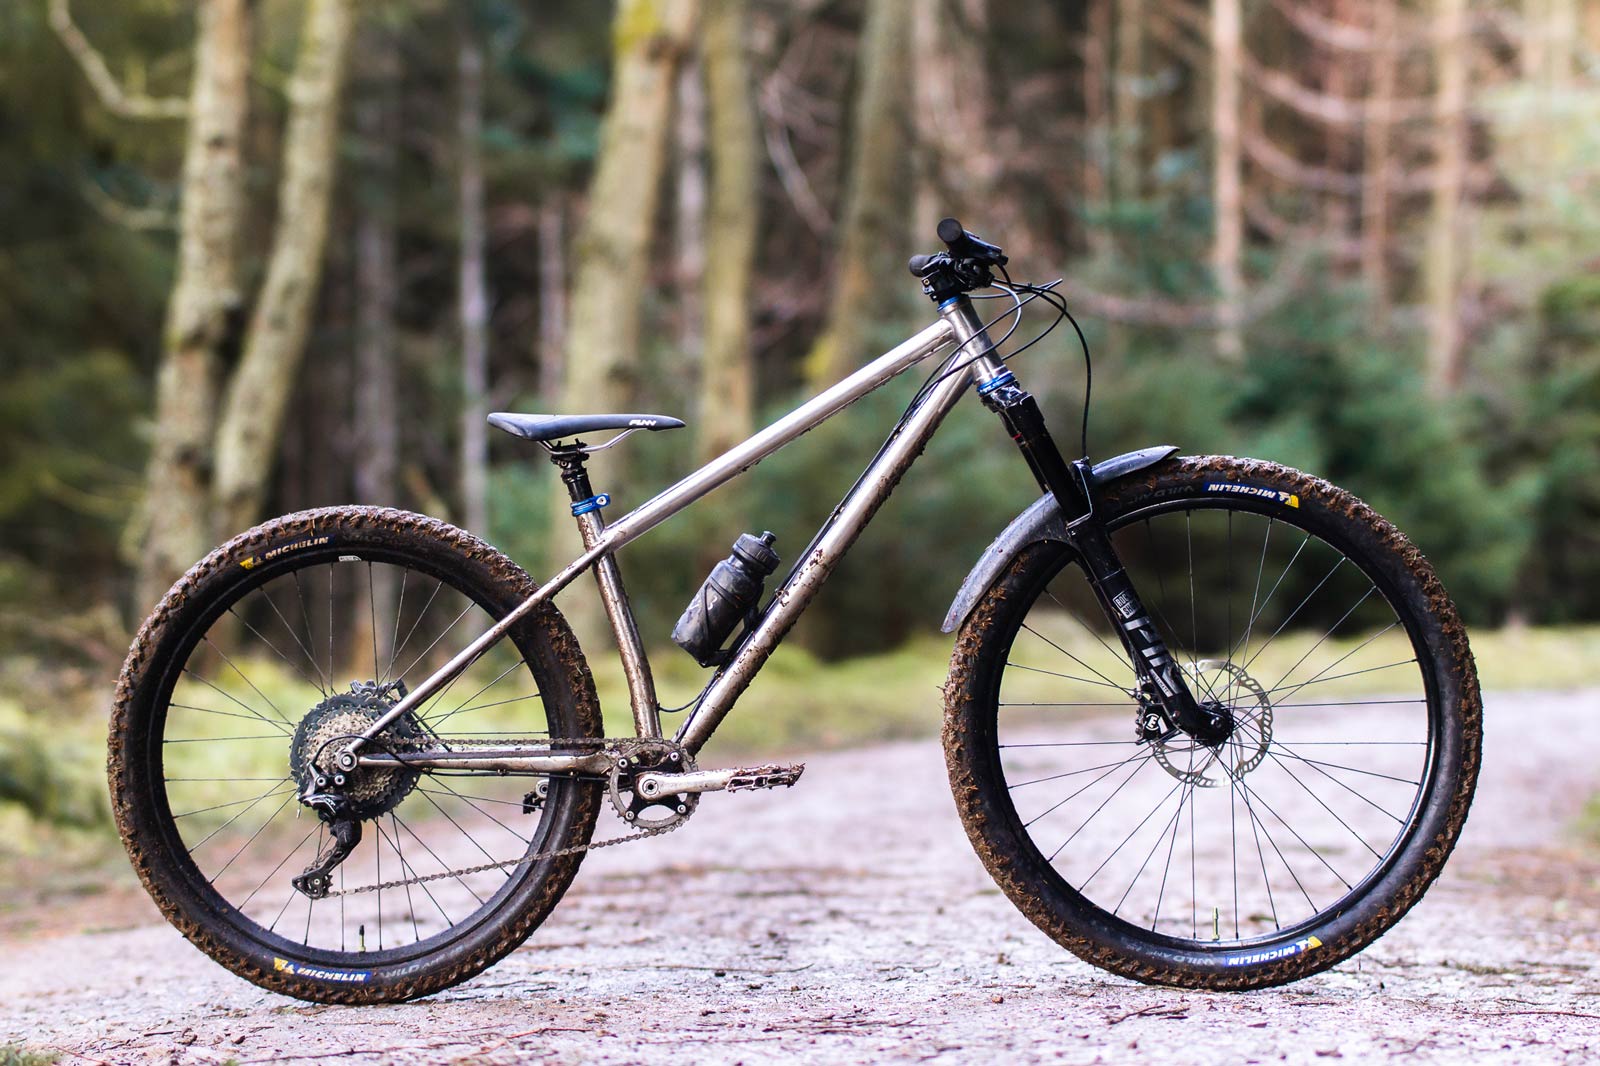 starling roost review stainless steel hardtail 140mm travel fork